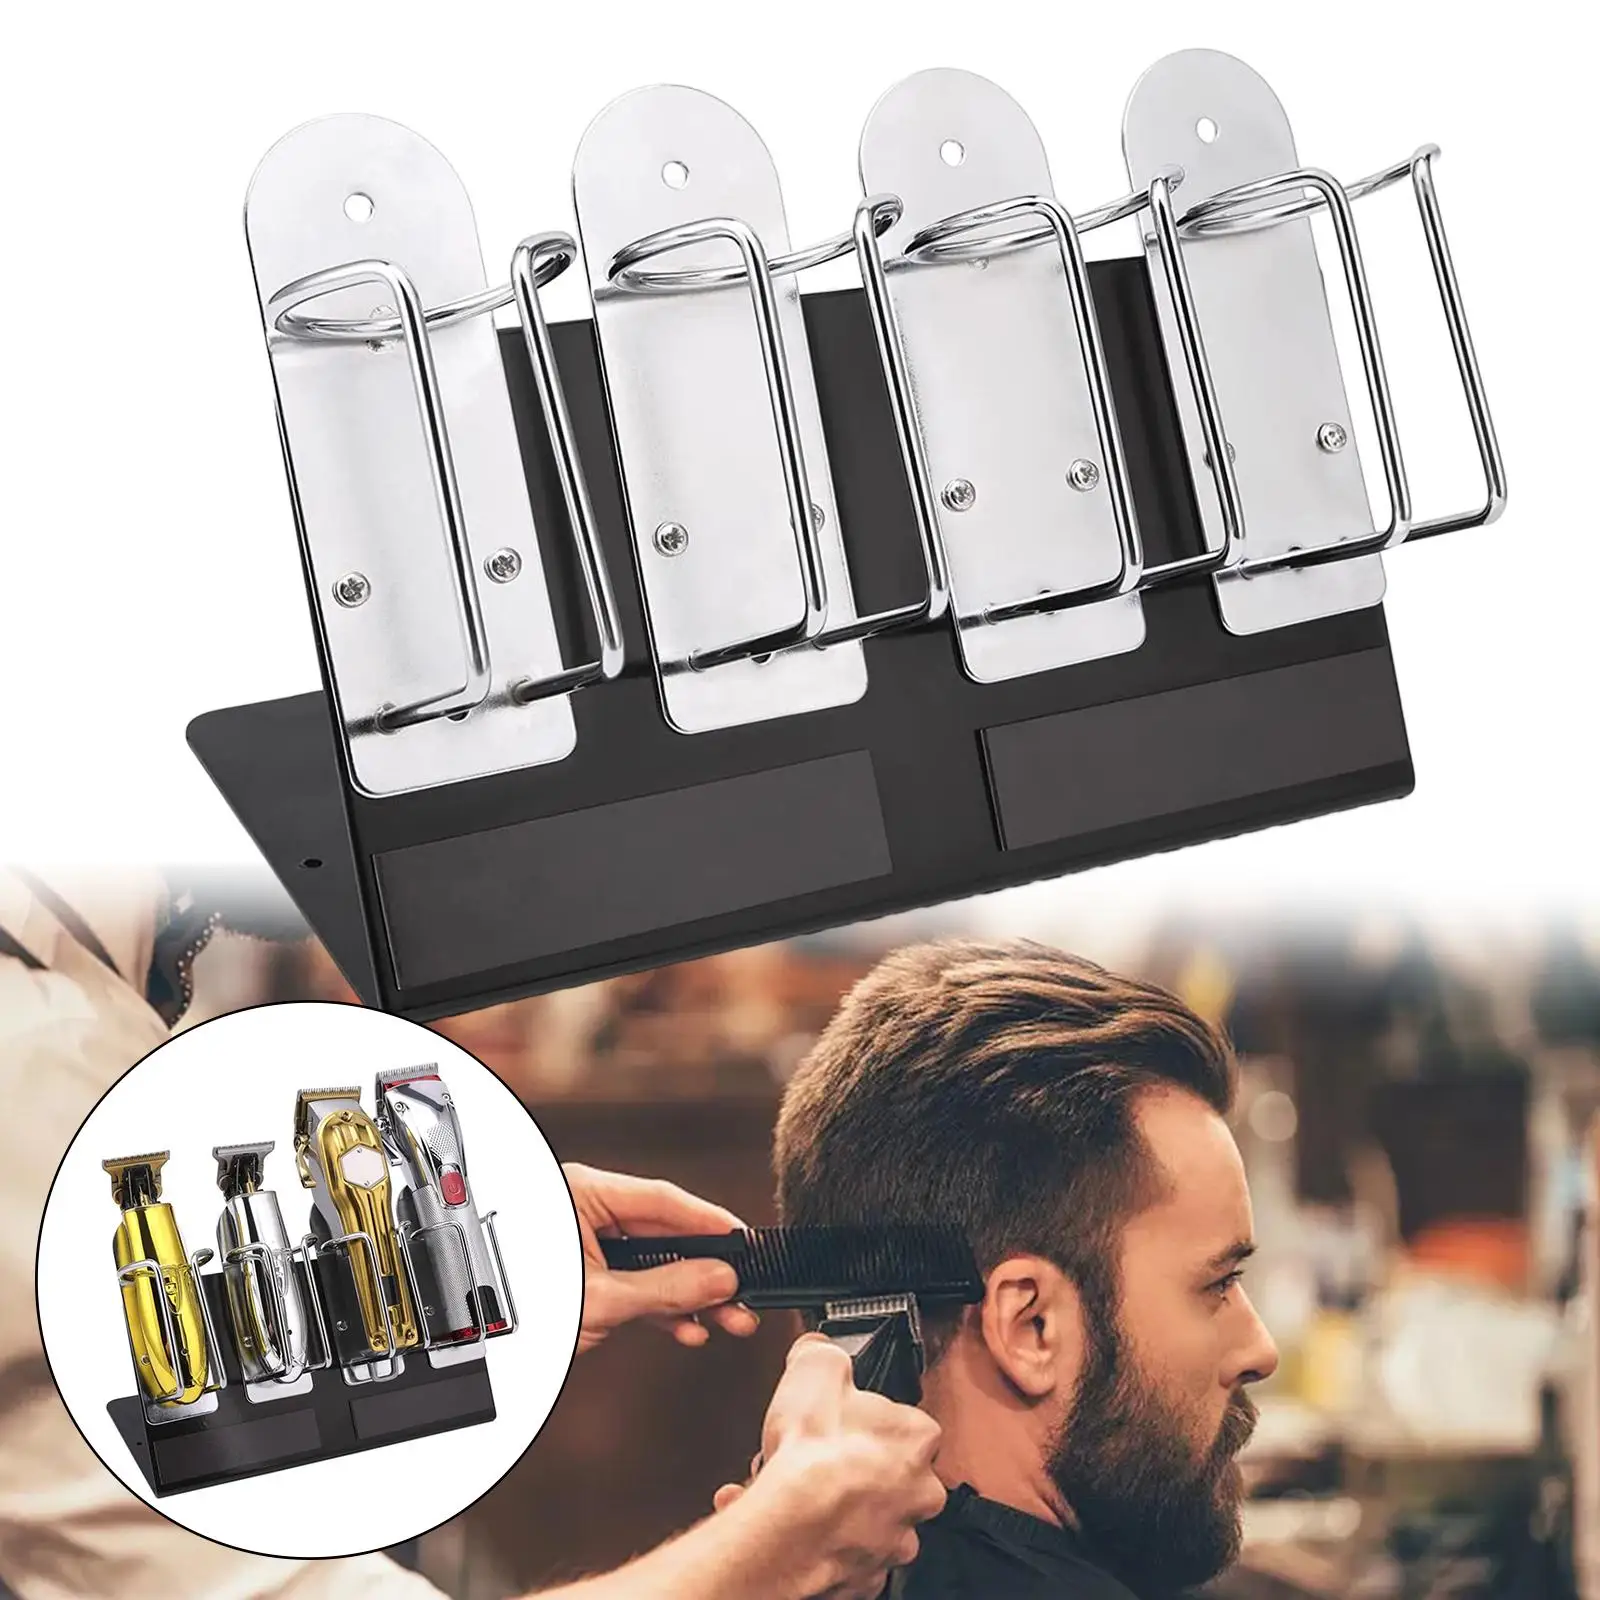 4 Slots Hair Clipper Holder, Salon Beard Shaver Rack, Electric Hair Clipper Holder Stand, for Barbers Hairstylist